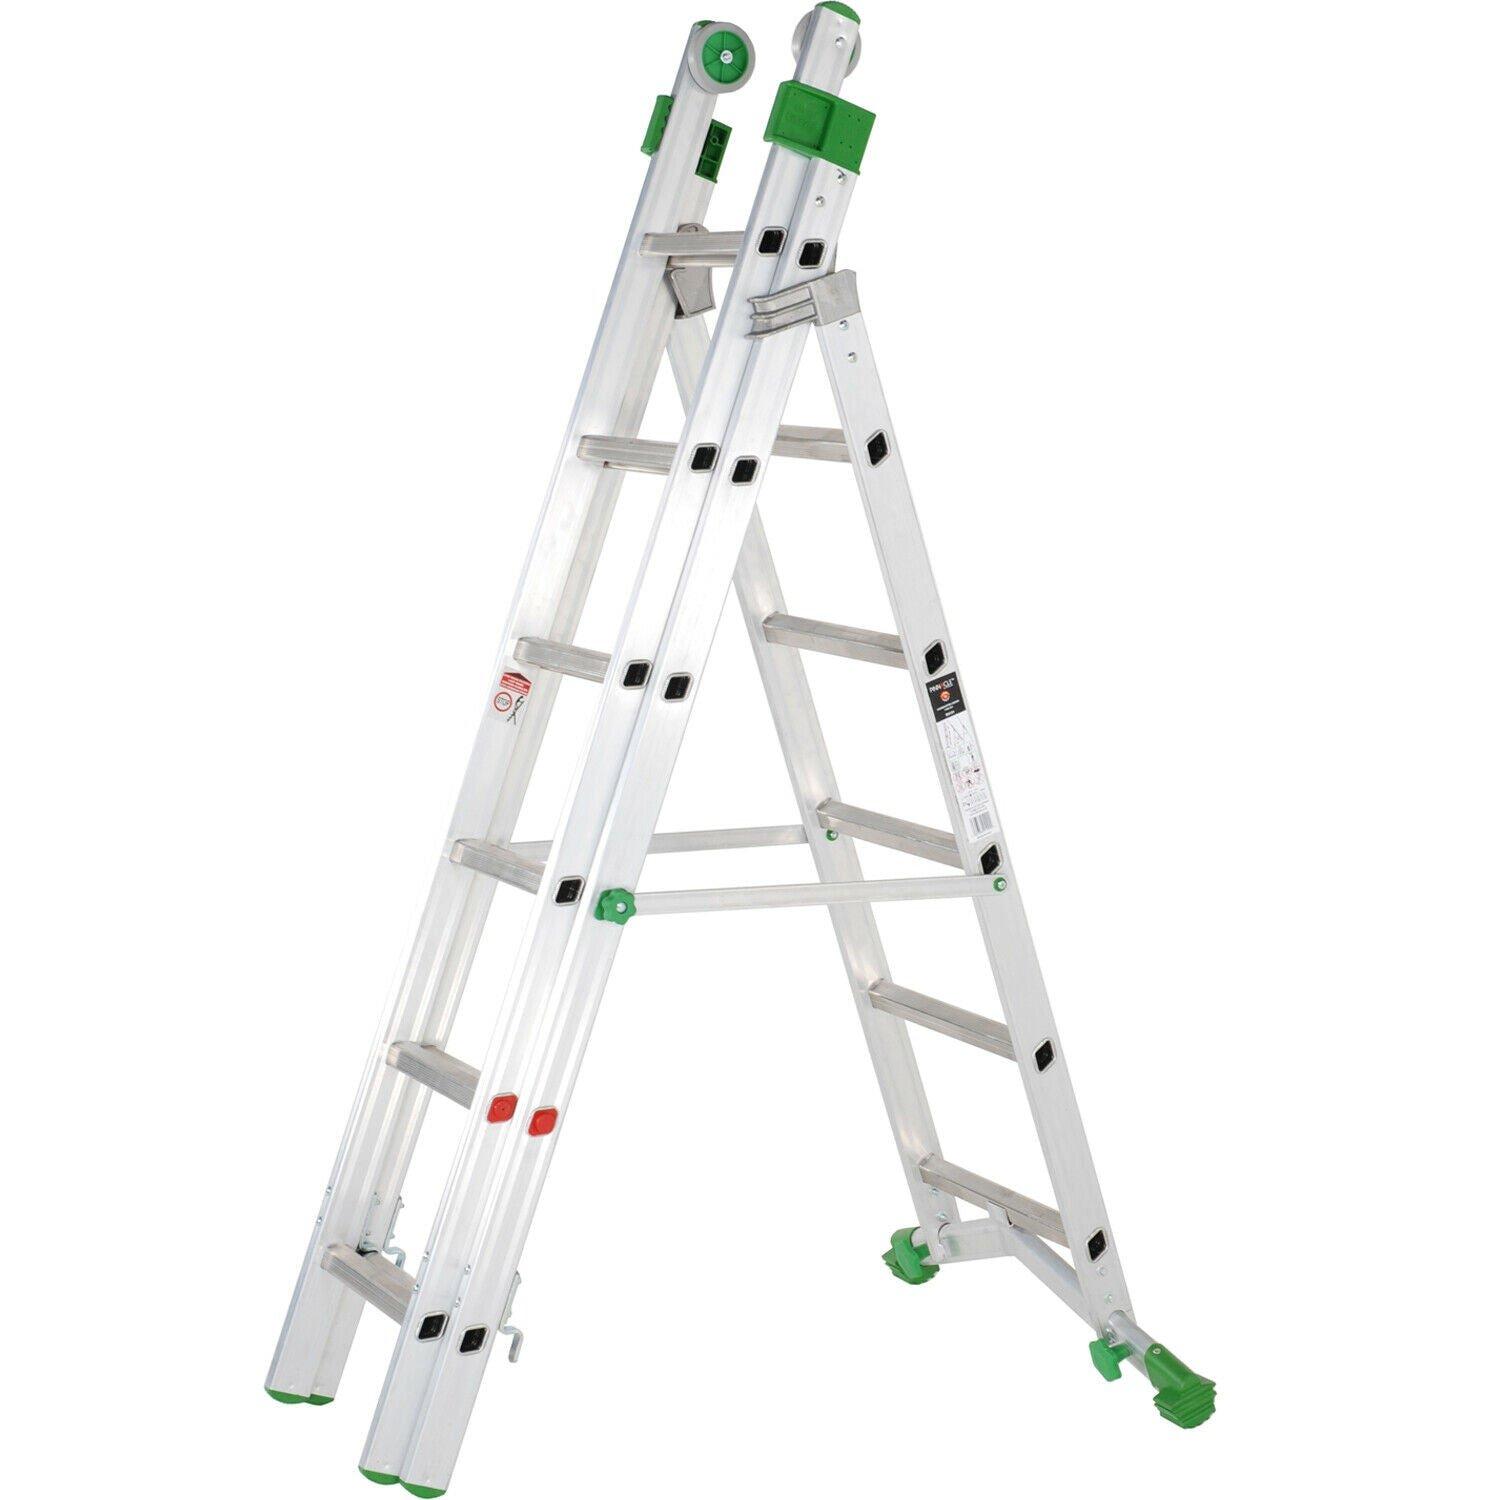 PREMIUM 18 Tread Combination Ladder 3 Section Extension Step Frame & Stairwell